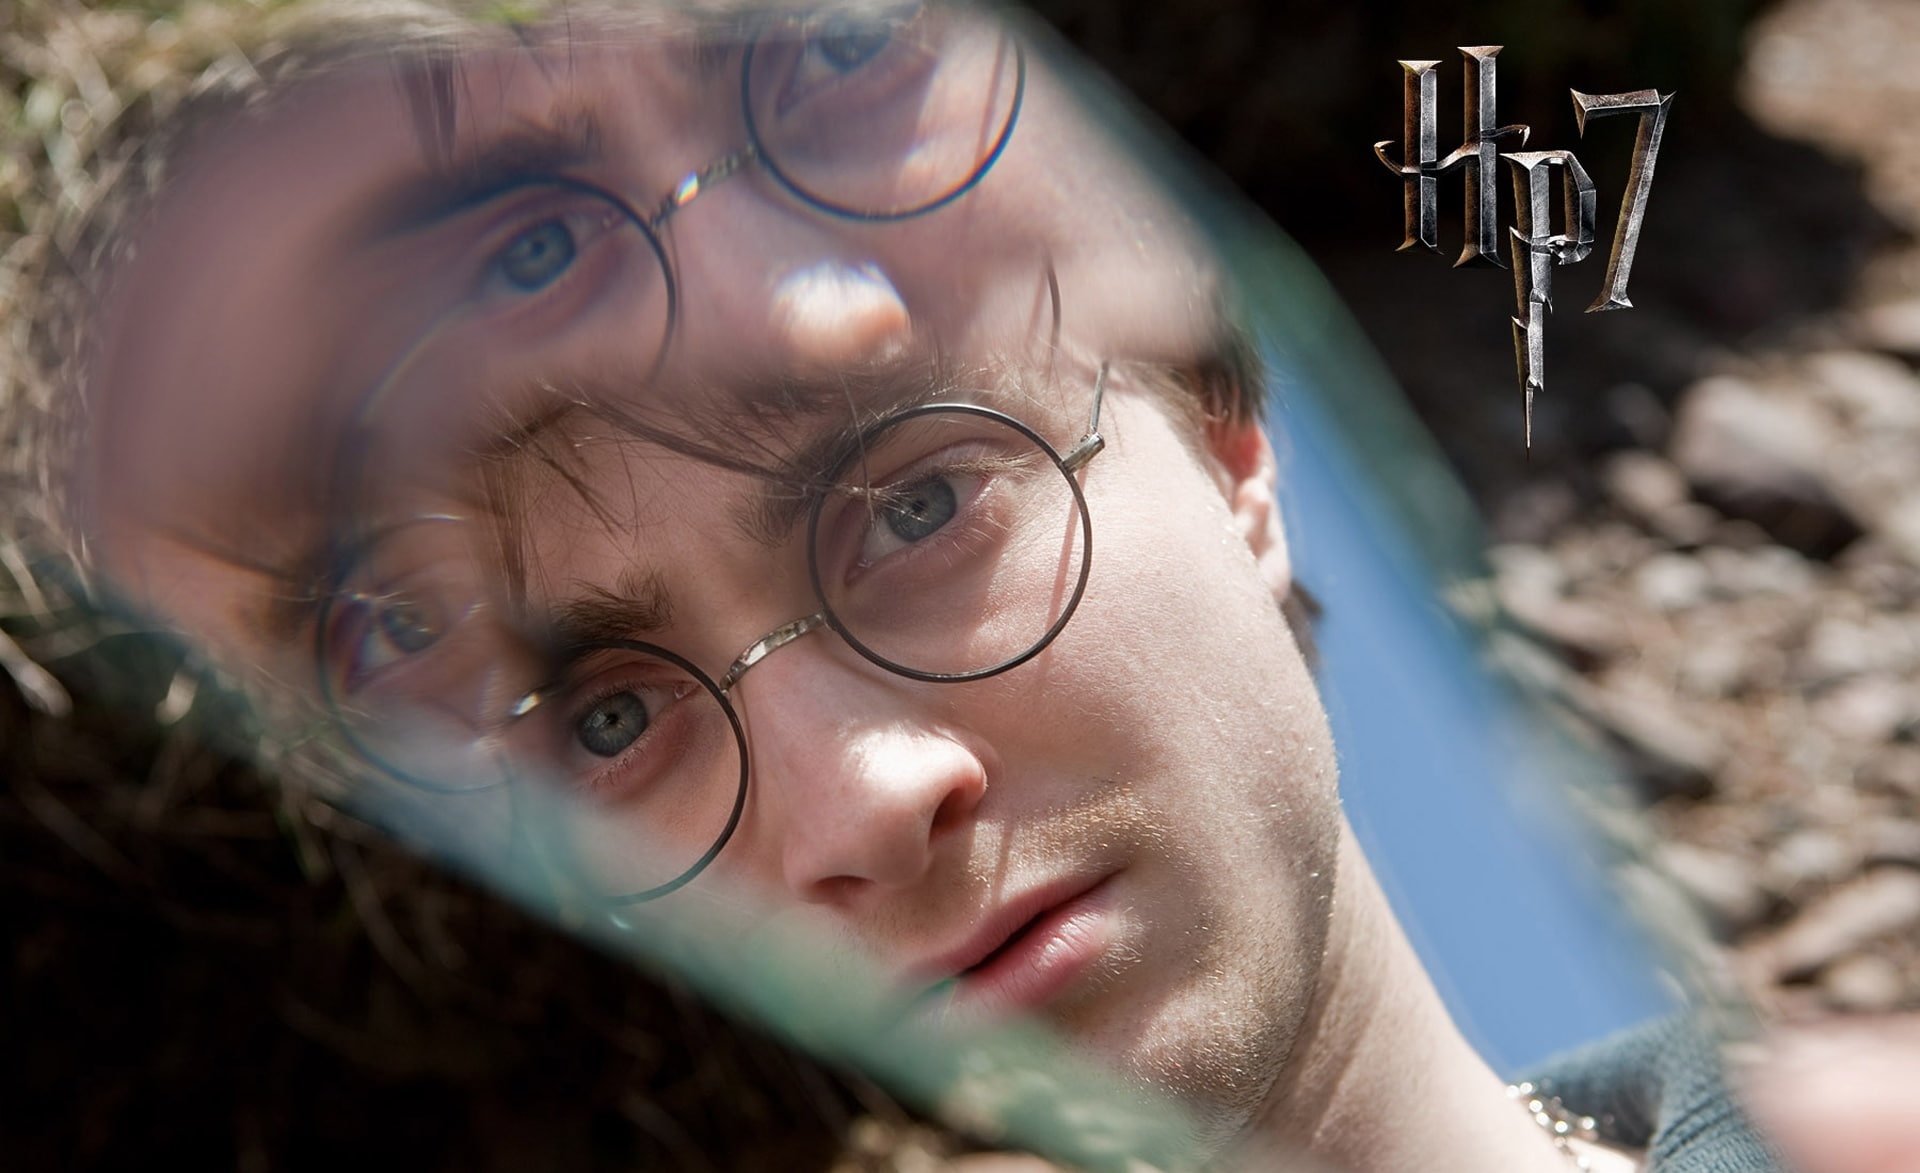 Harry Potter And The Deathly Hallows, Daniel Radcliffe as Harry Potter